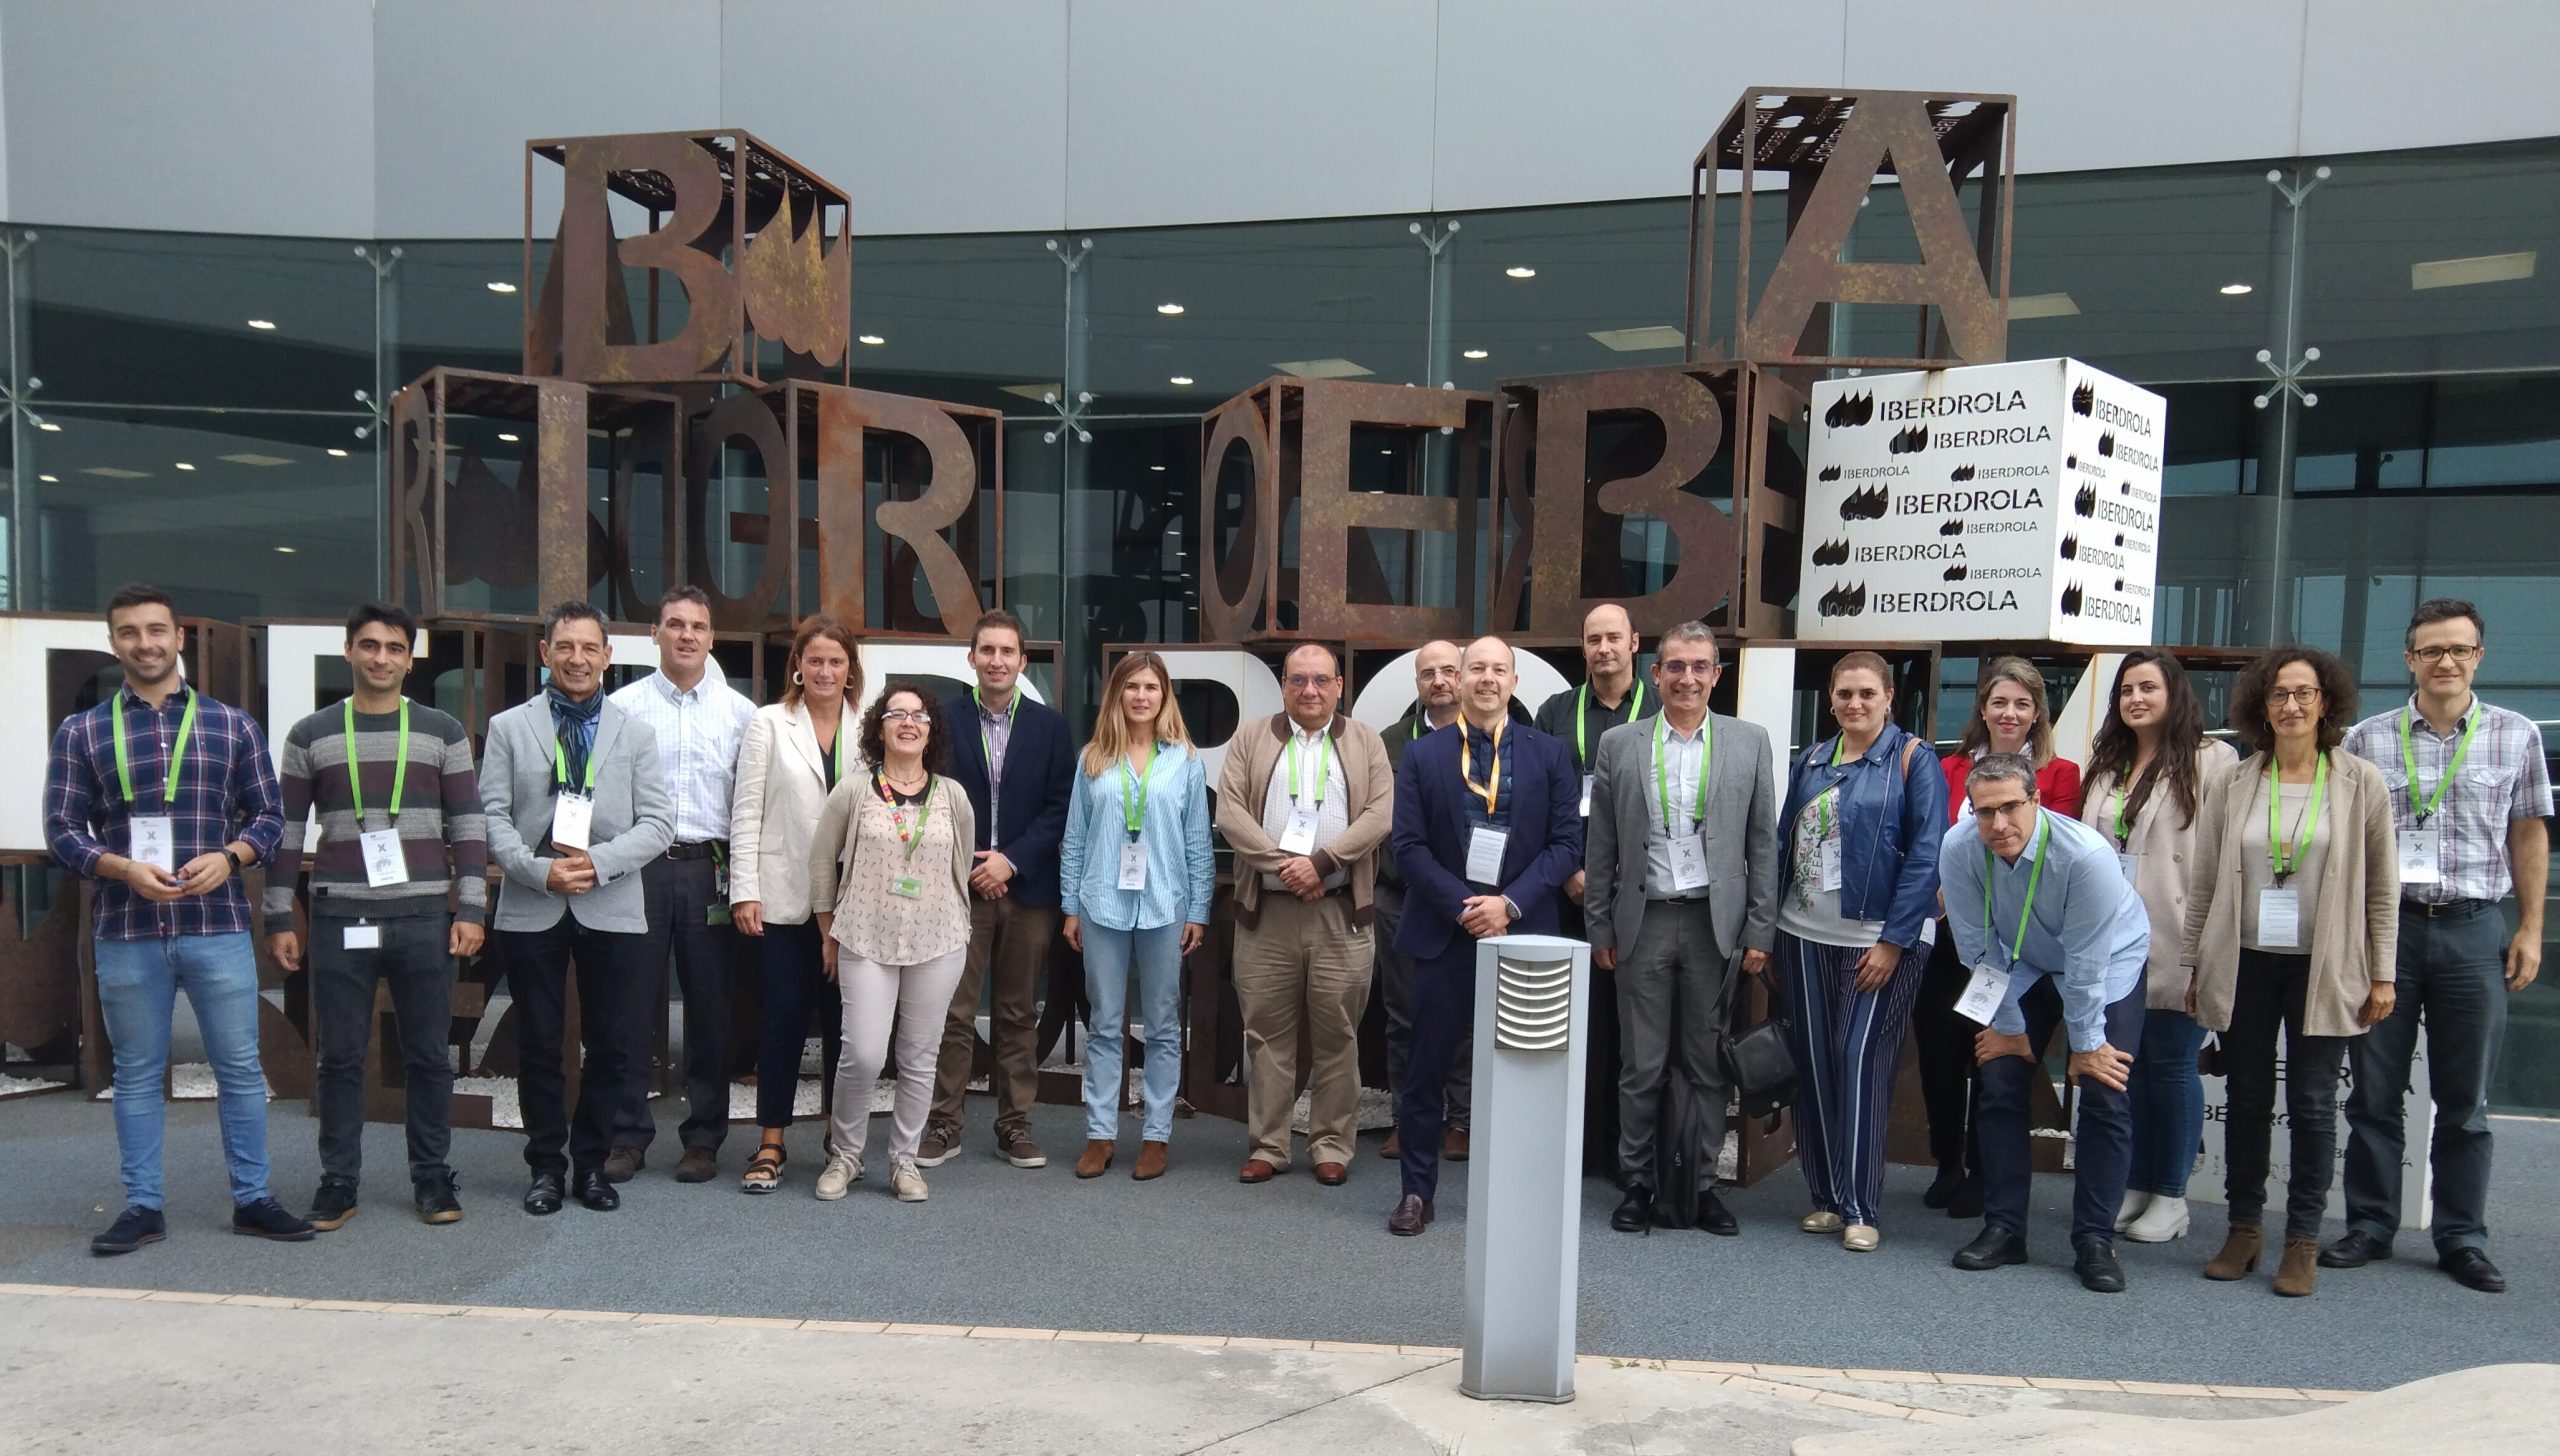 A consortium of eight Basque companies, headed by Iberdrola, is developing a new high-performance hydrogen refuelling station (HRS) for heavy vehicles 